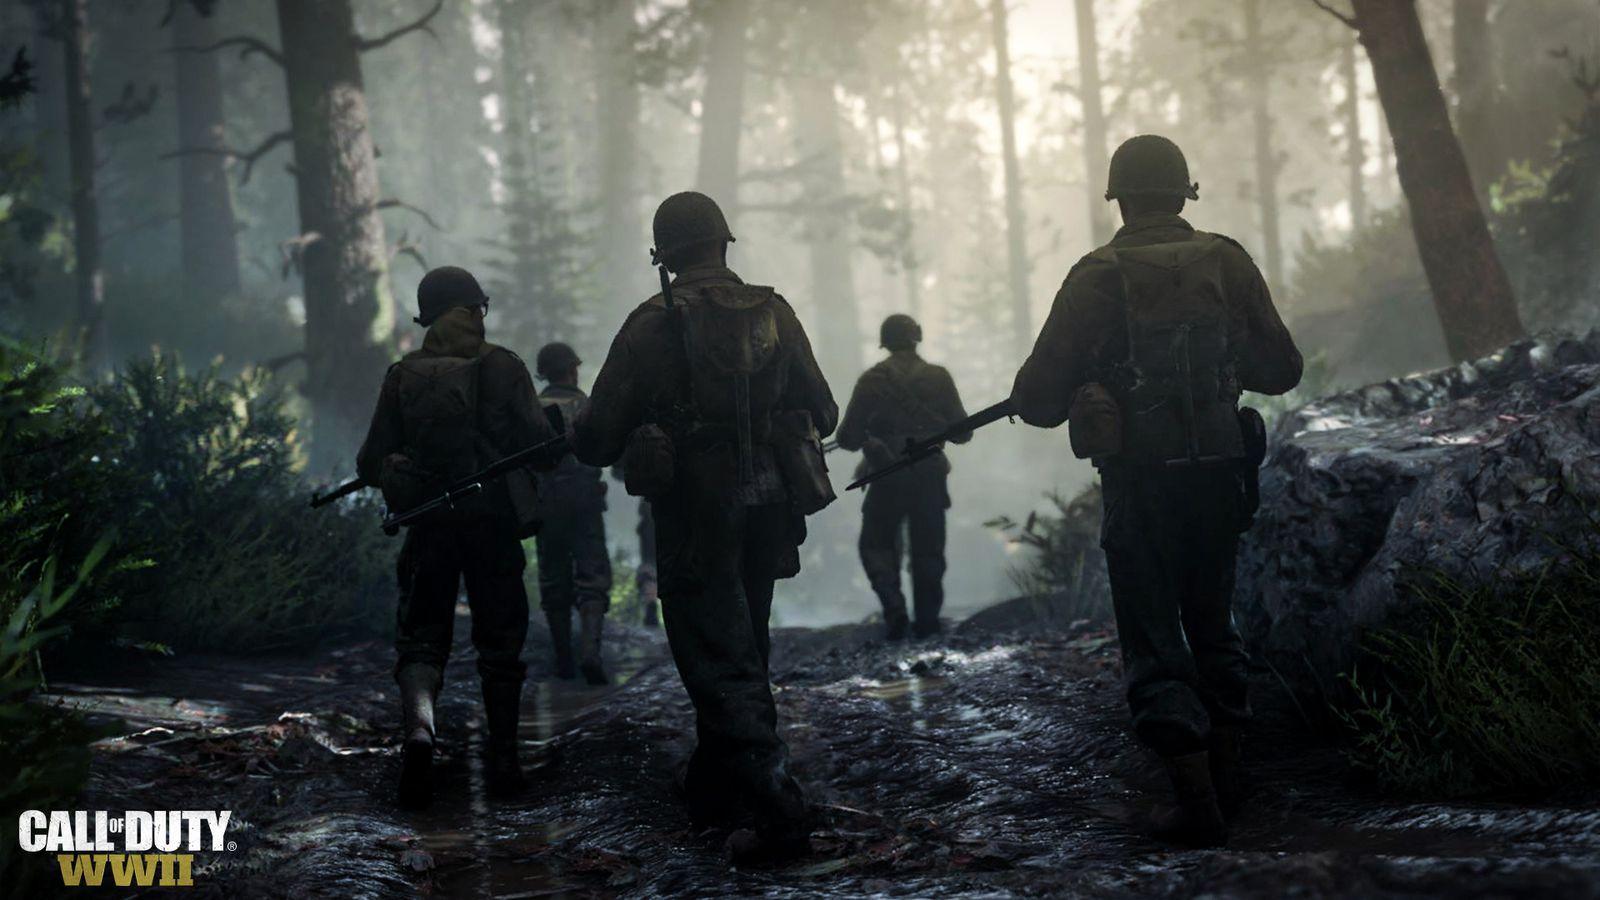 Call of Duty is missing what makes WWII stories so timeless